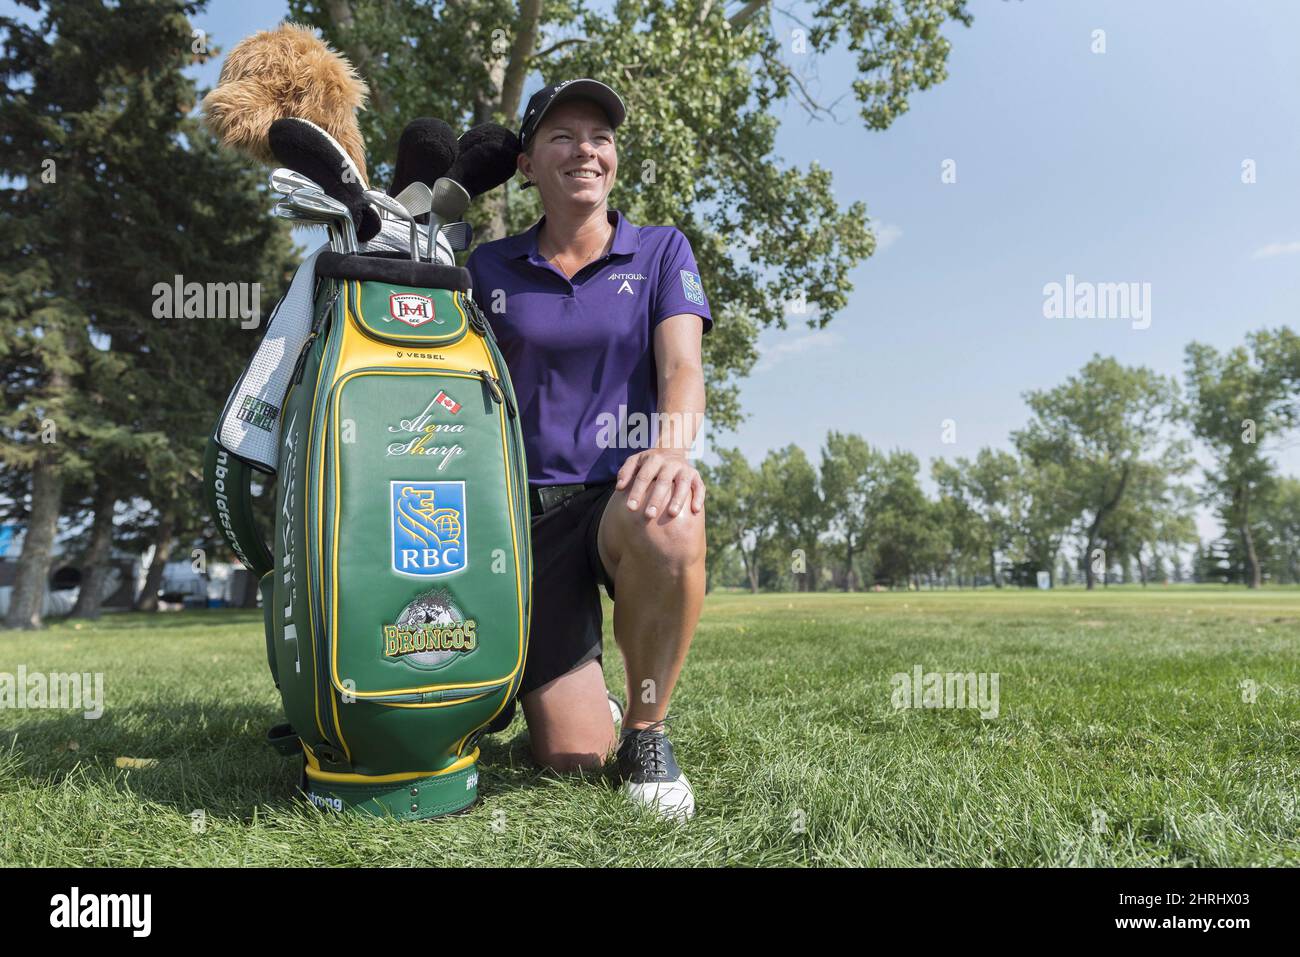 Alena Sharp poses with her golf bag during the CP Women's Open at Wascana Country Club in Regina on August 21, 2018. Most golfers look for balance in their swing. Hamilton's Alena Sharp found it in her life and is now reaping the benefits on the LPGA Tour. Sharp was named Golf Canada's player of the week on Feb. 18 after tying for sixth at the Women's Australian Open and tying for 17th at the Victoria Open to open the LPGA Tour's season. Sharp credits a more measured approach to training and a better work-life balance to help her stay focused after a frustrating 2018 where she battled with dep Stock Photo